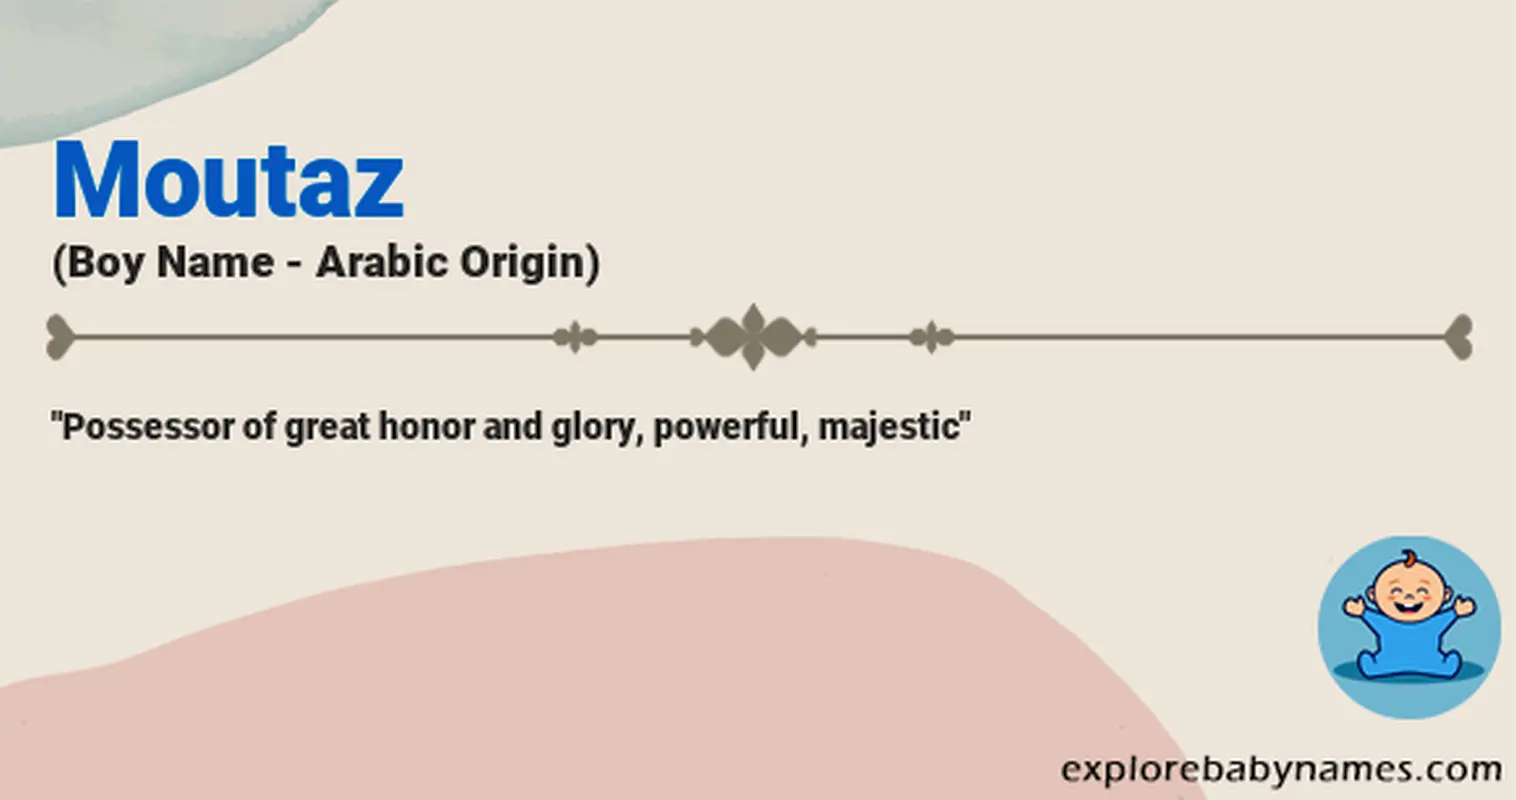 Meaning of Moutaz